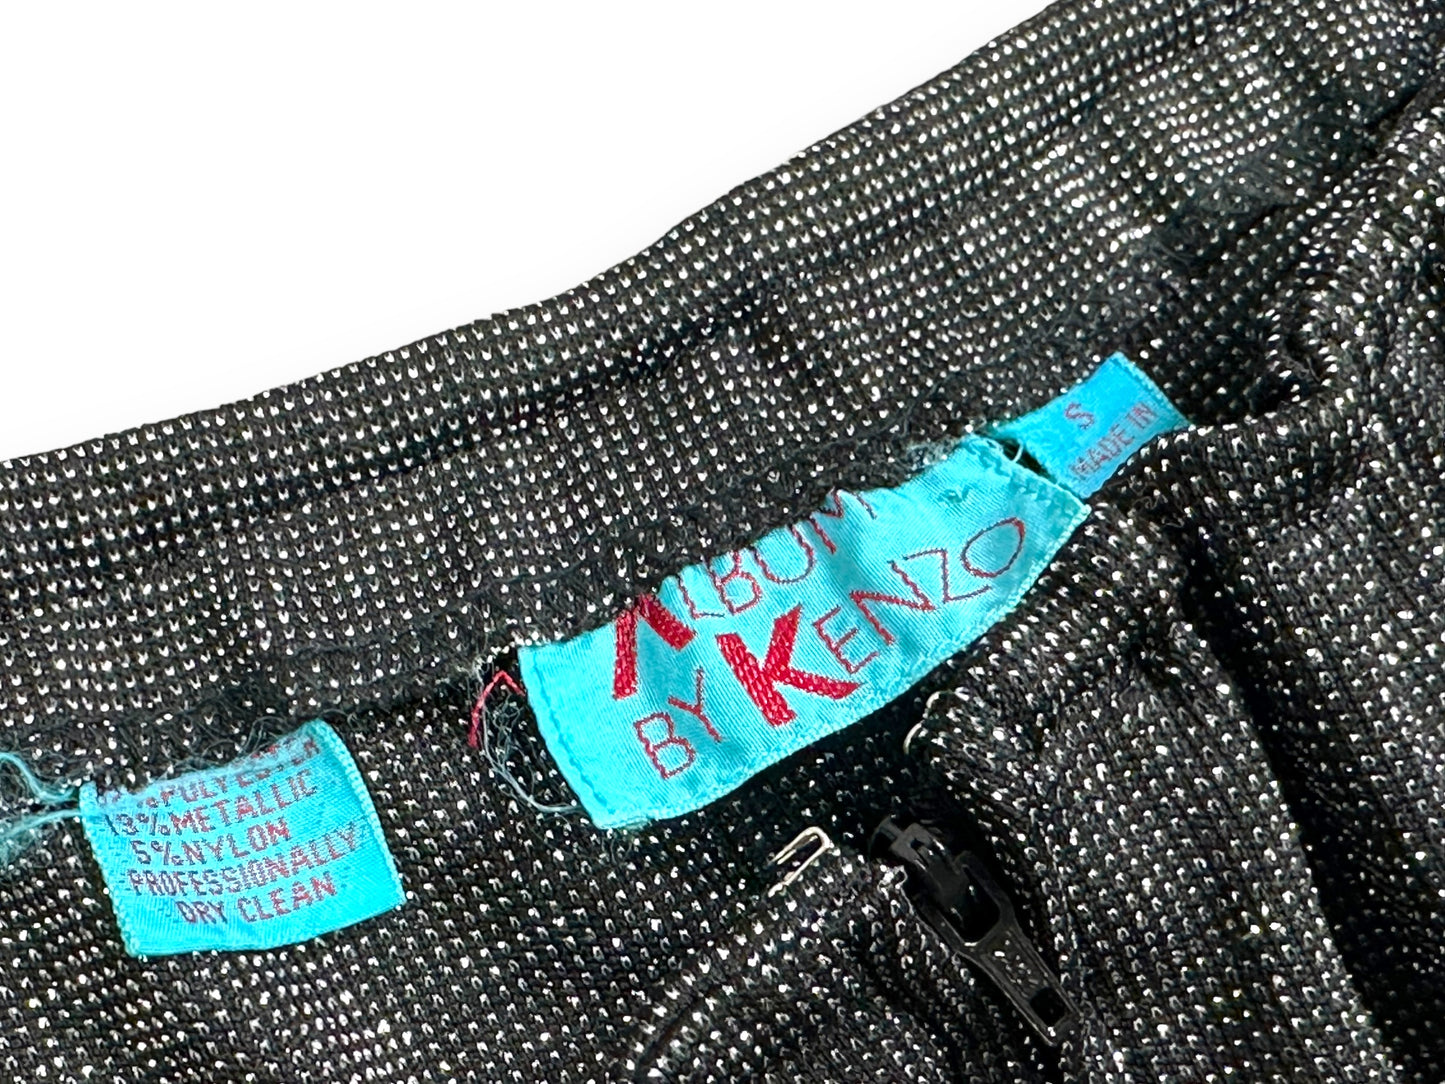 1990s “Album by Kenzo” (Made in Japan)